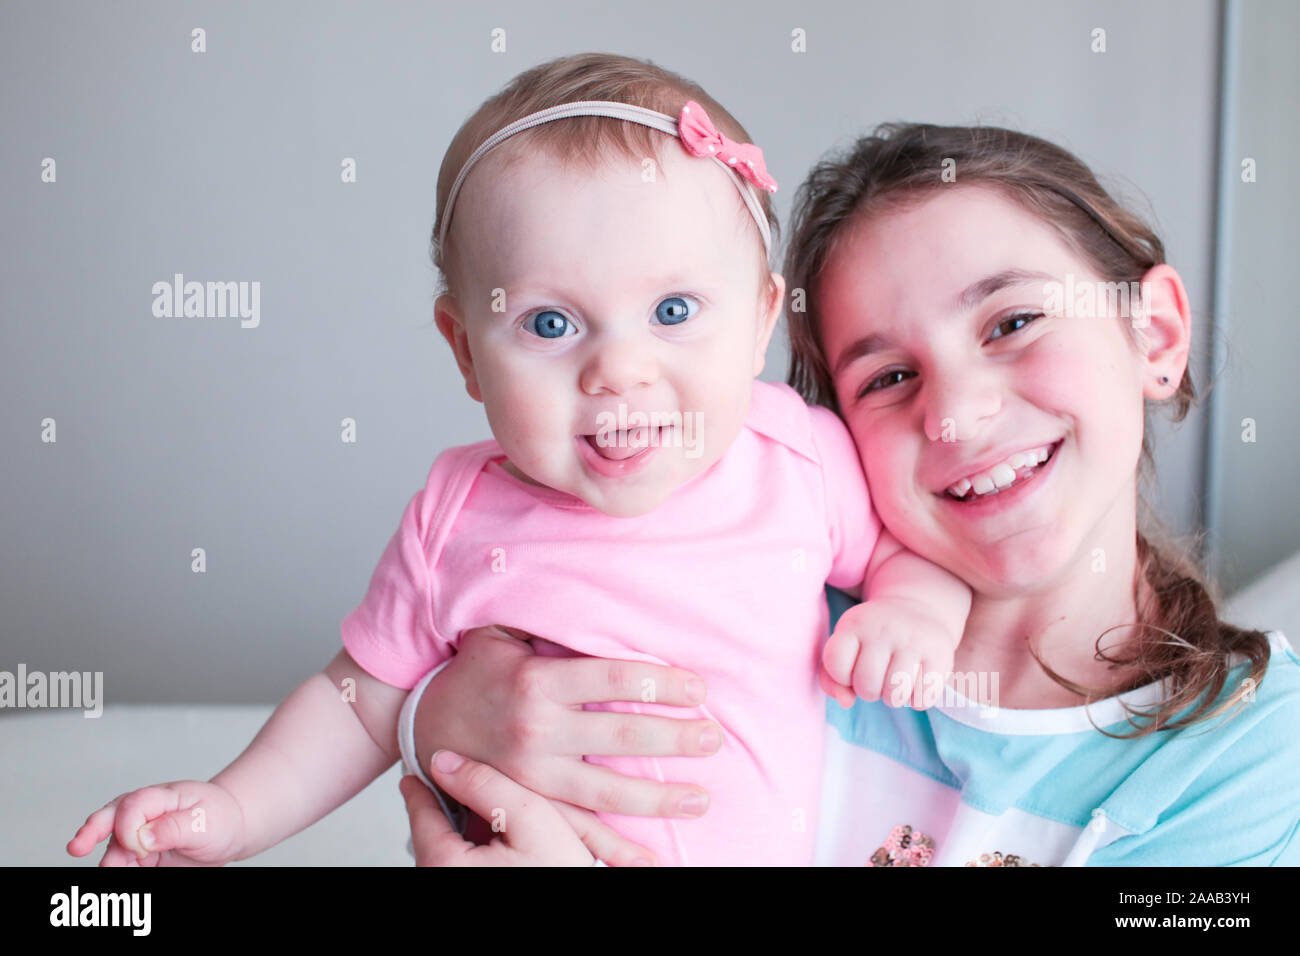 Close up Portrait of Two Sisters, Cute 8 Month Old baby Girl with Big blue Eyes and 8 Years Old School Age Girl With Brown Eyes , Happy Baby Girl Stock Photo